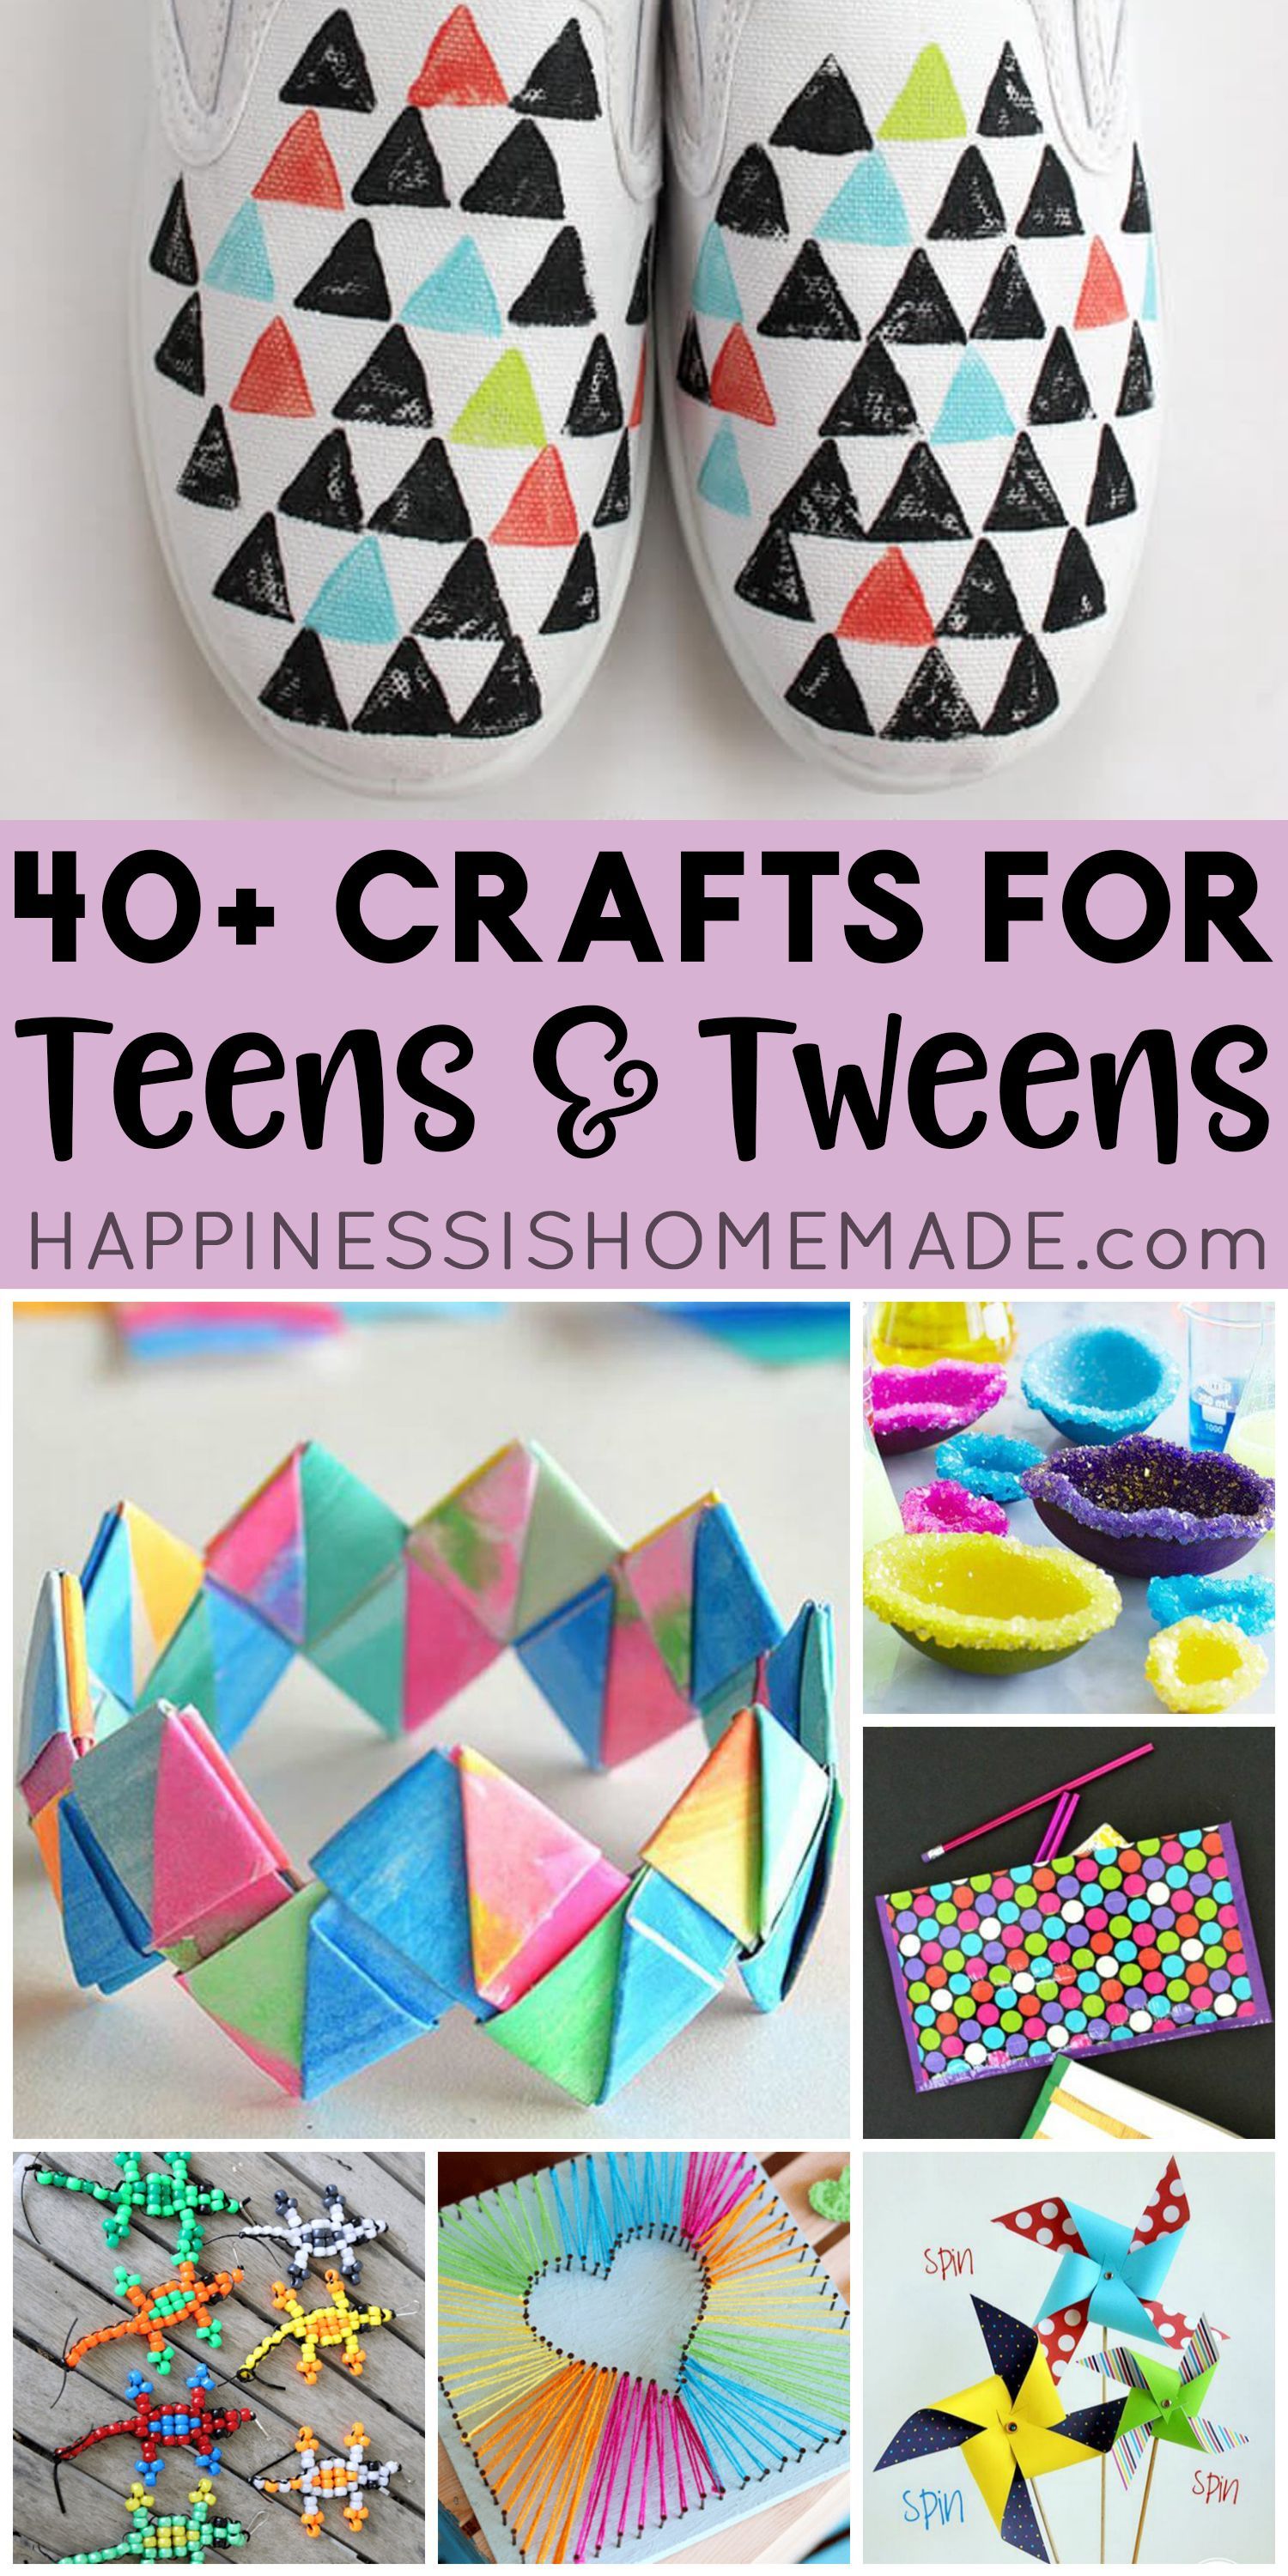 40+ Crafts for Teens and Tweens -   17 diy projects for kids teen crafts ideas